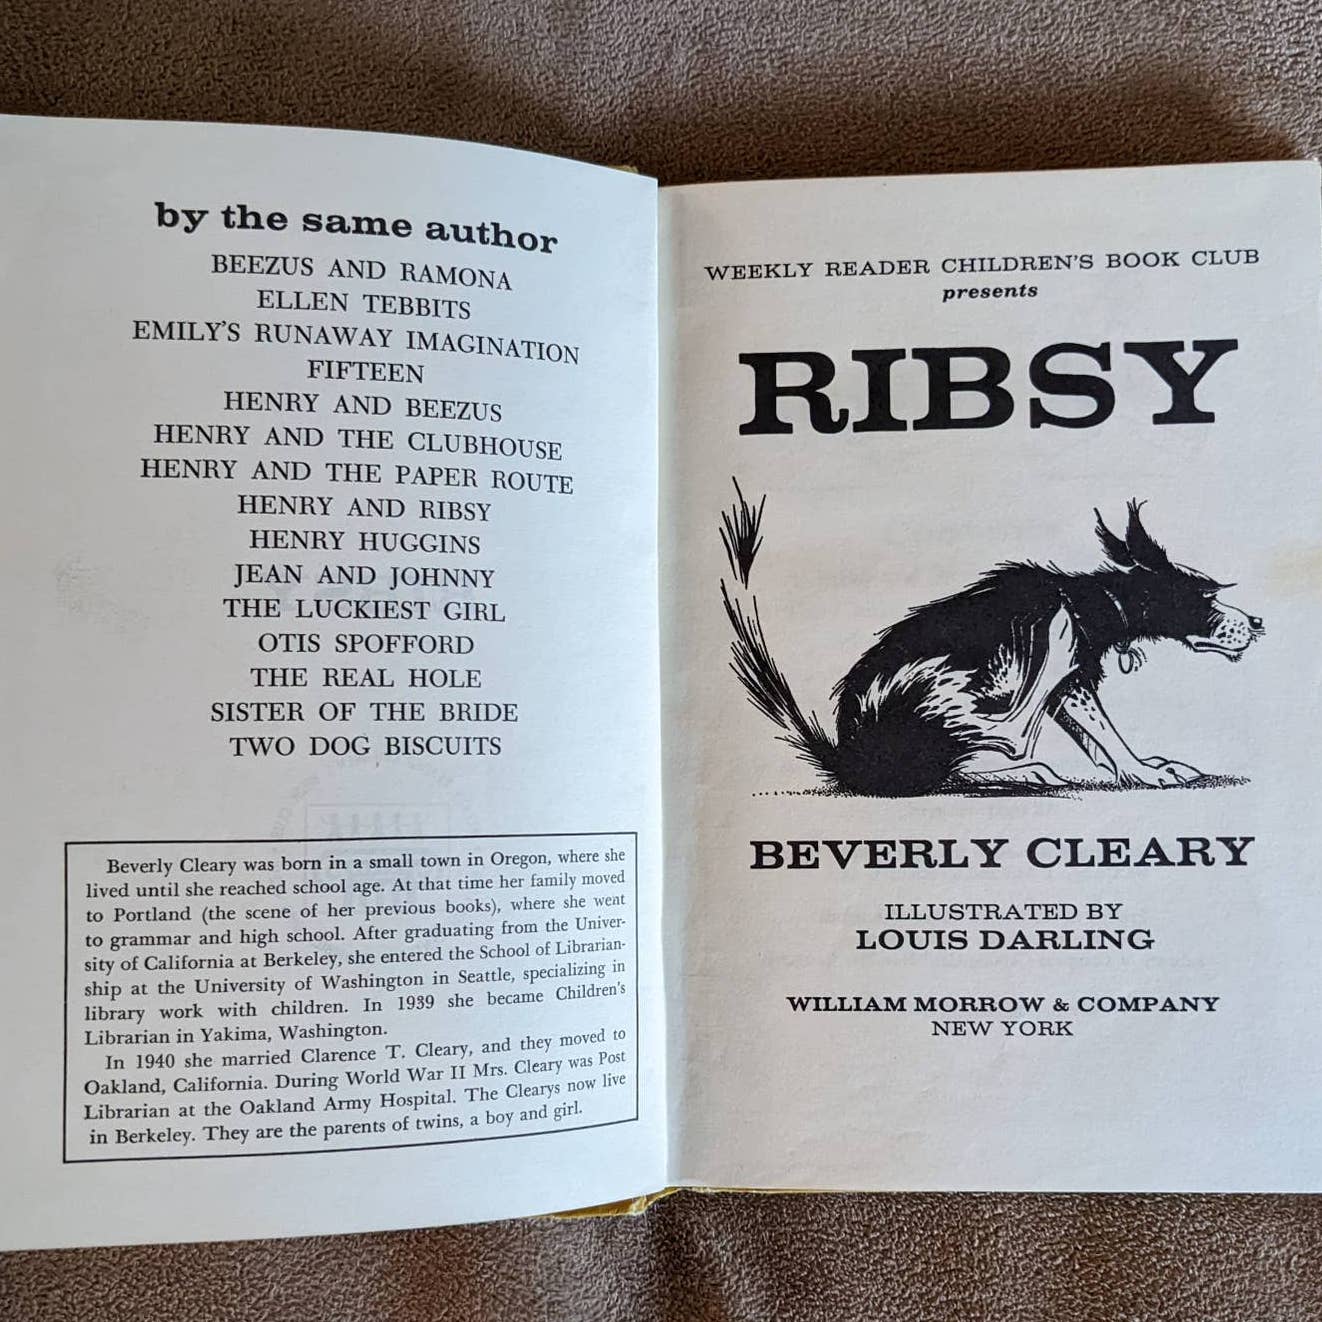 Vintage 1964 Ribsy By Beverly Clearly Illustrated Louis Darling Dog Childrens